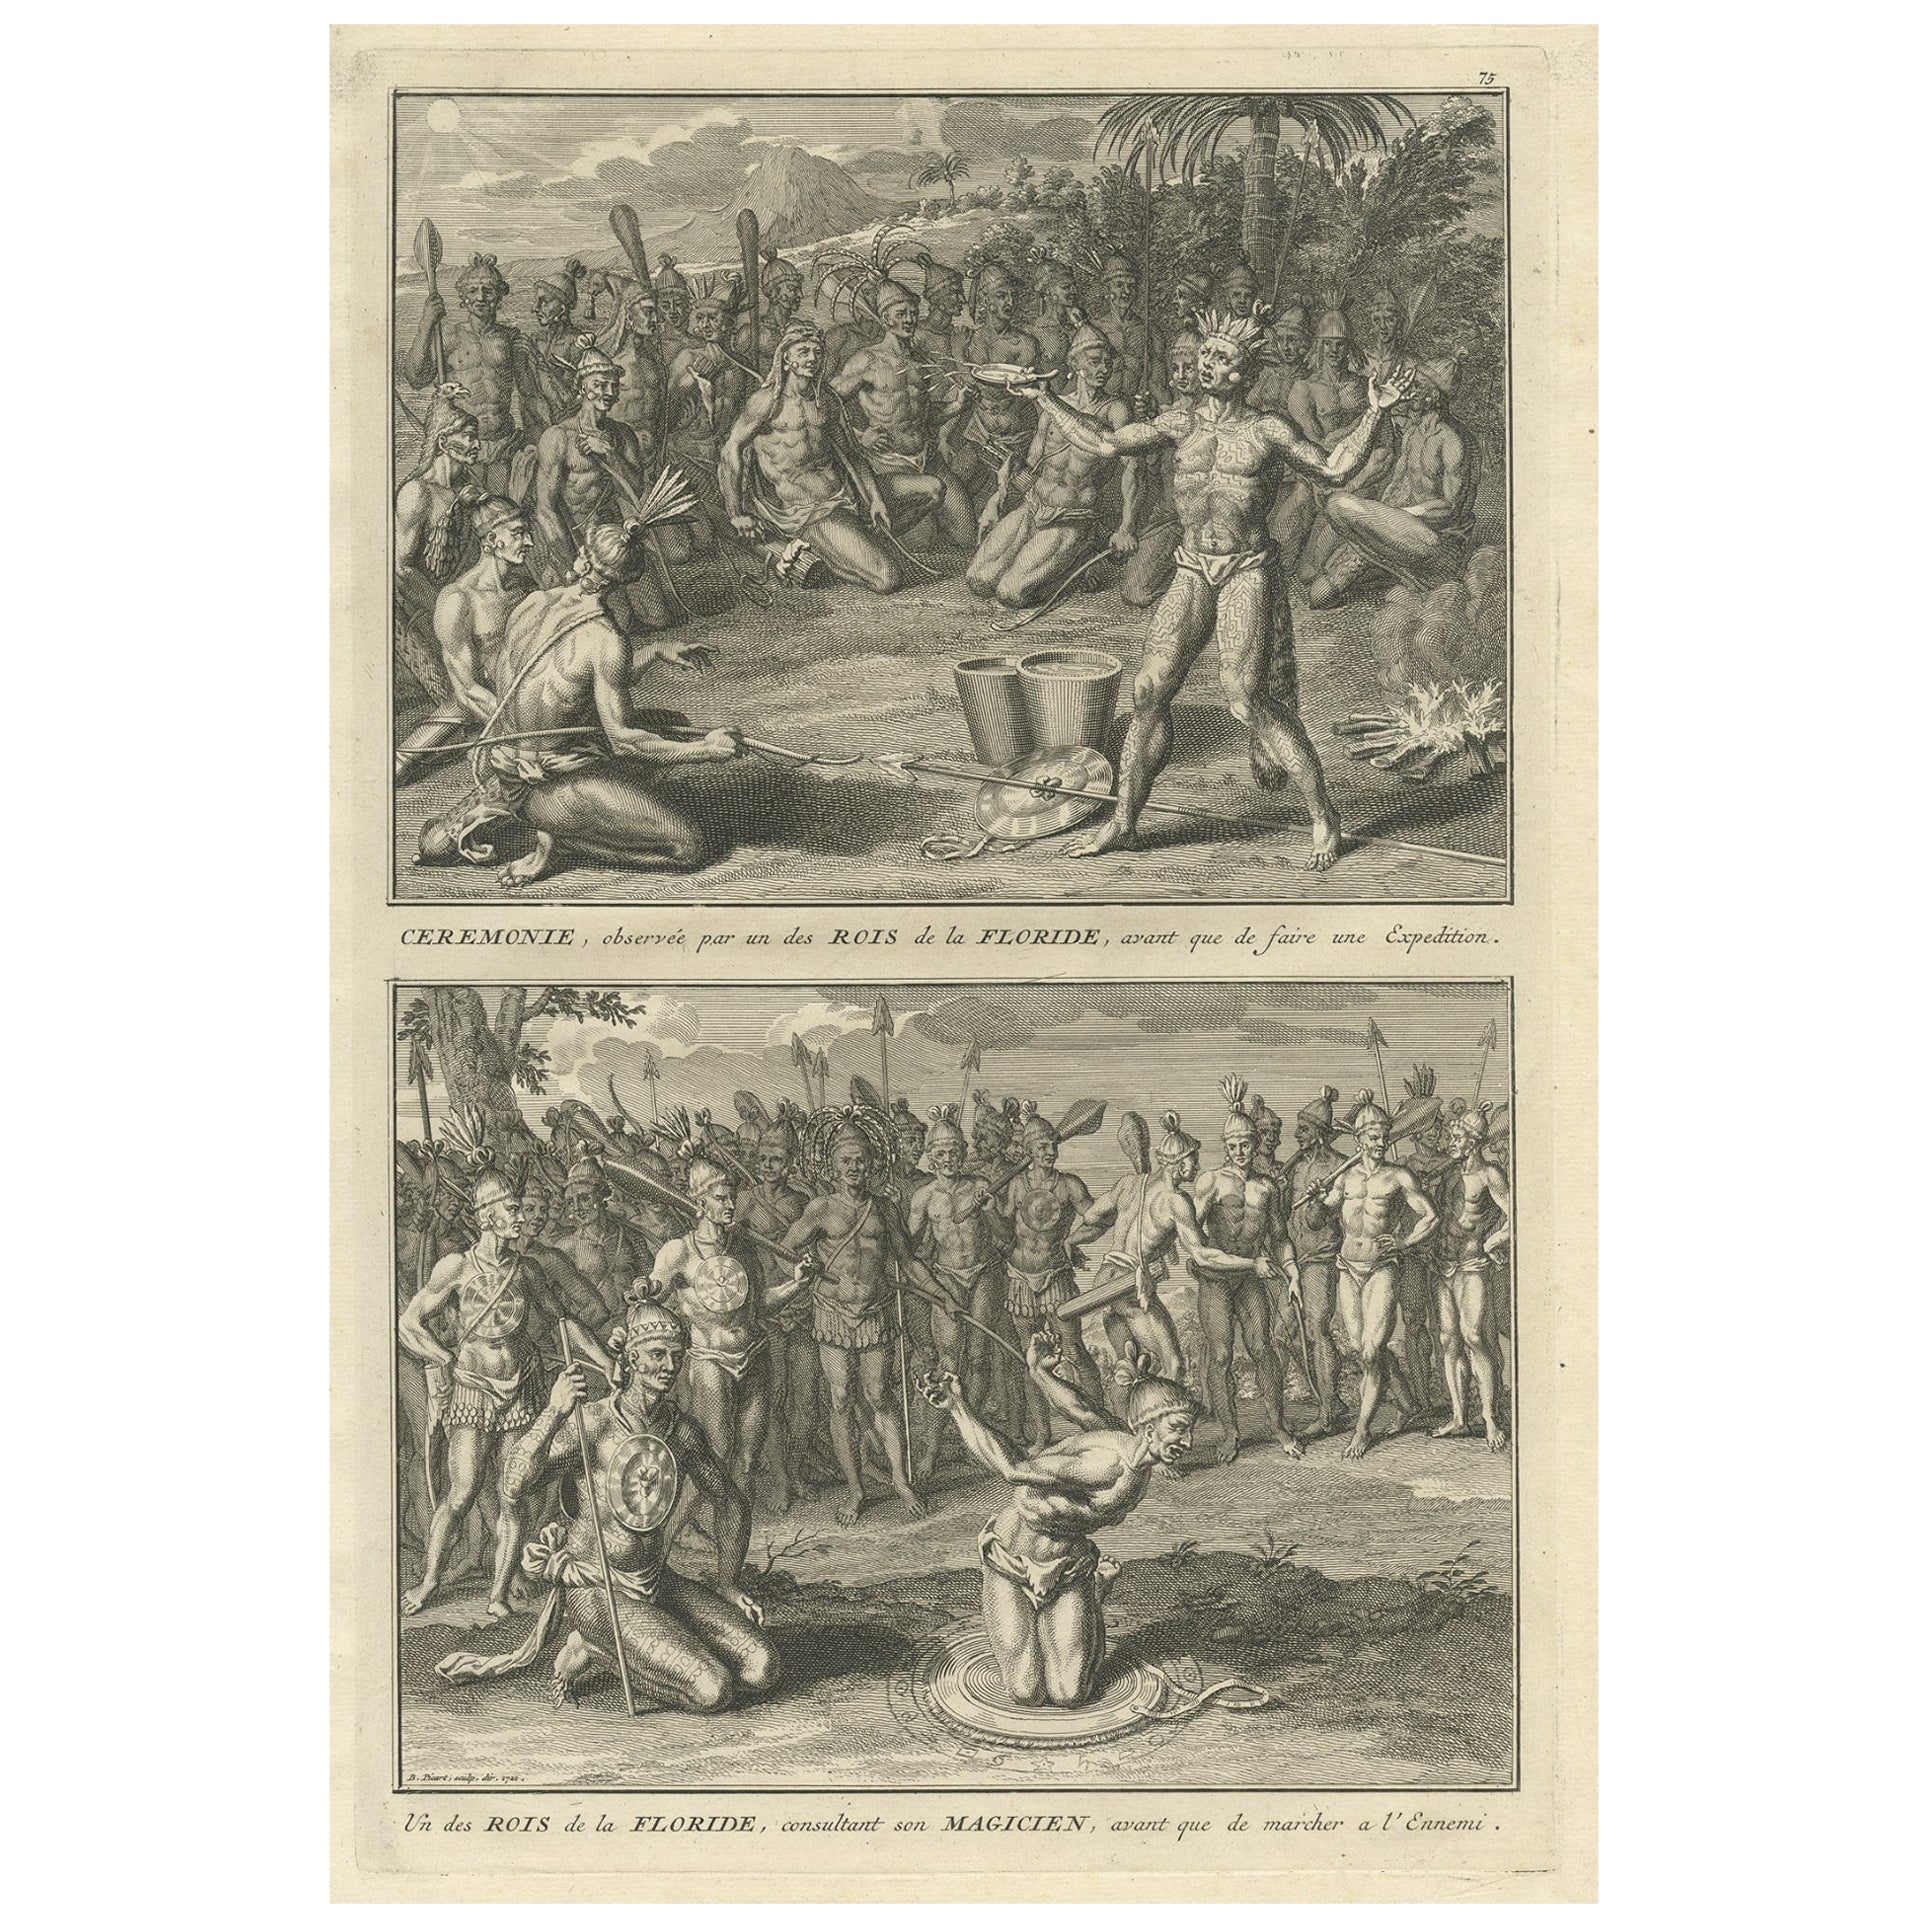 Two Engravings of an Florida King of the Indians in America, 1722